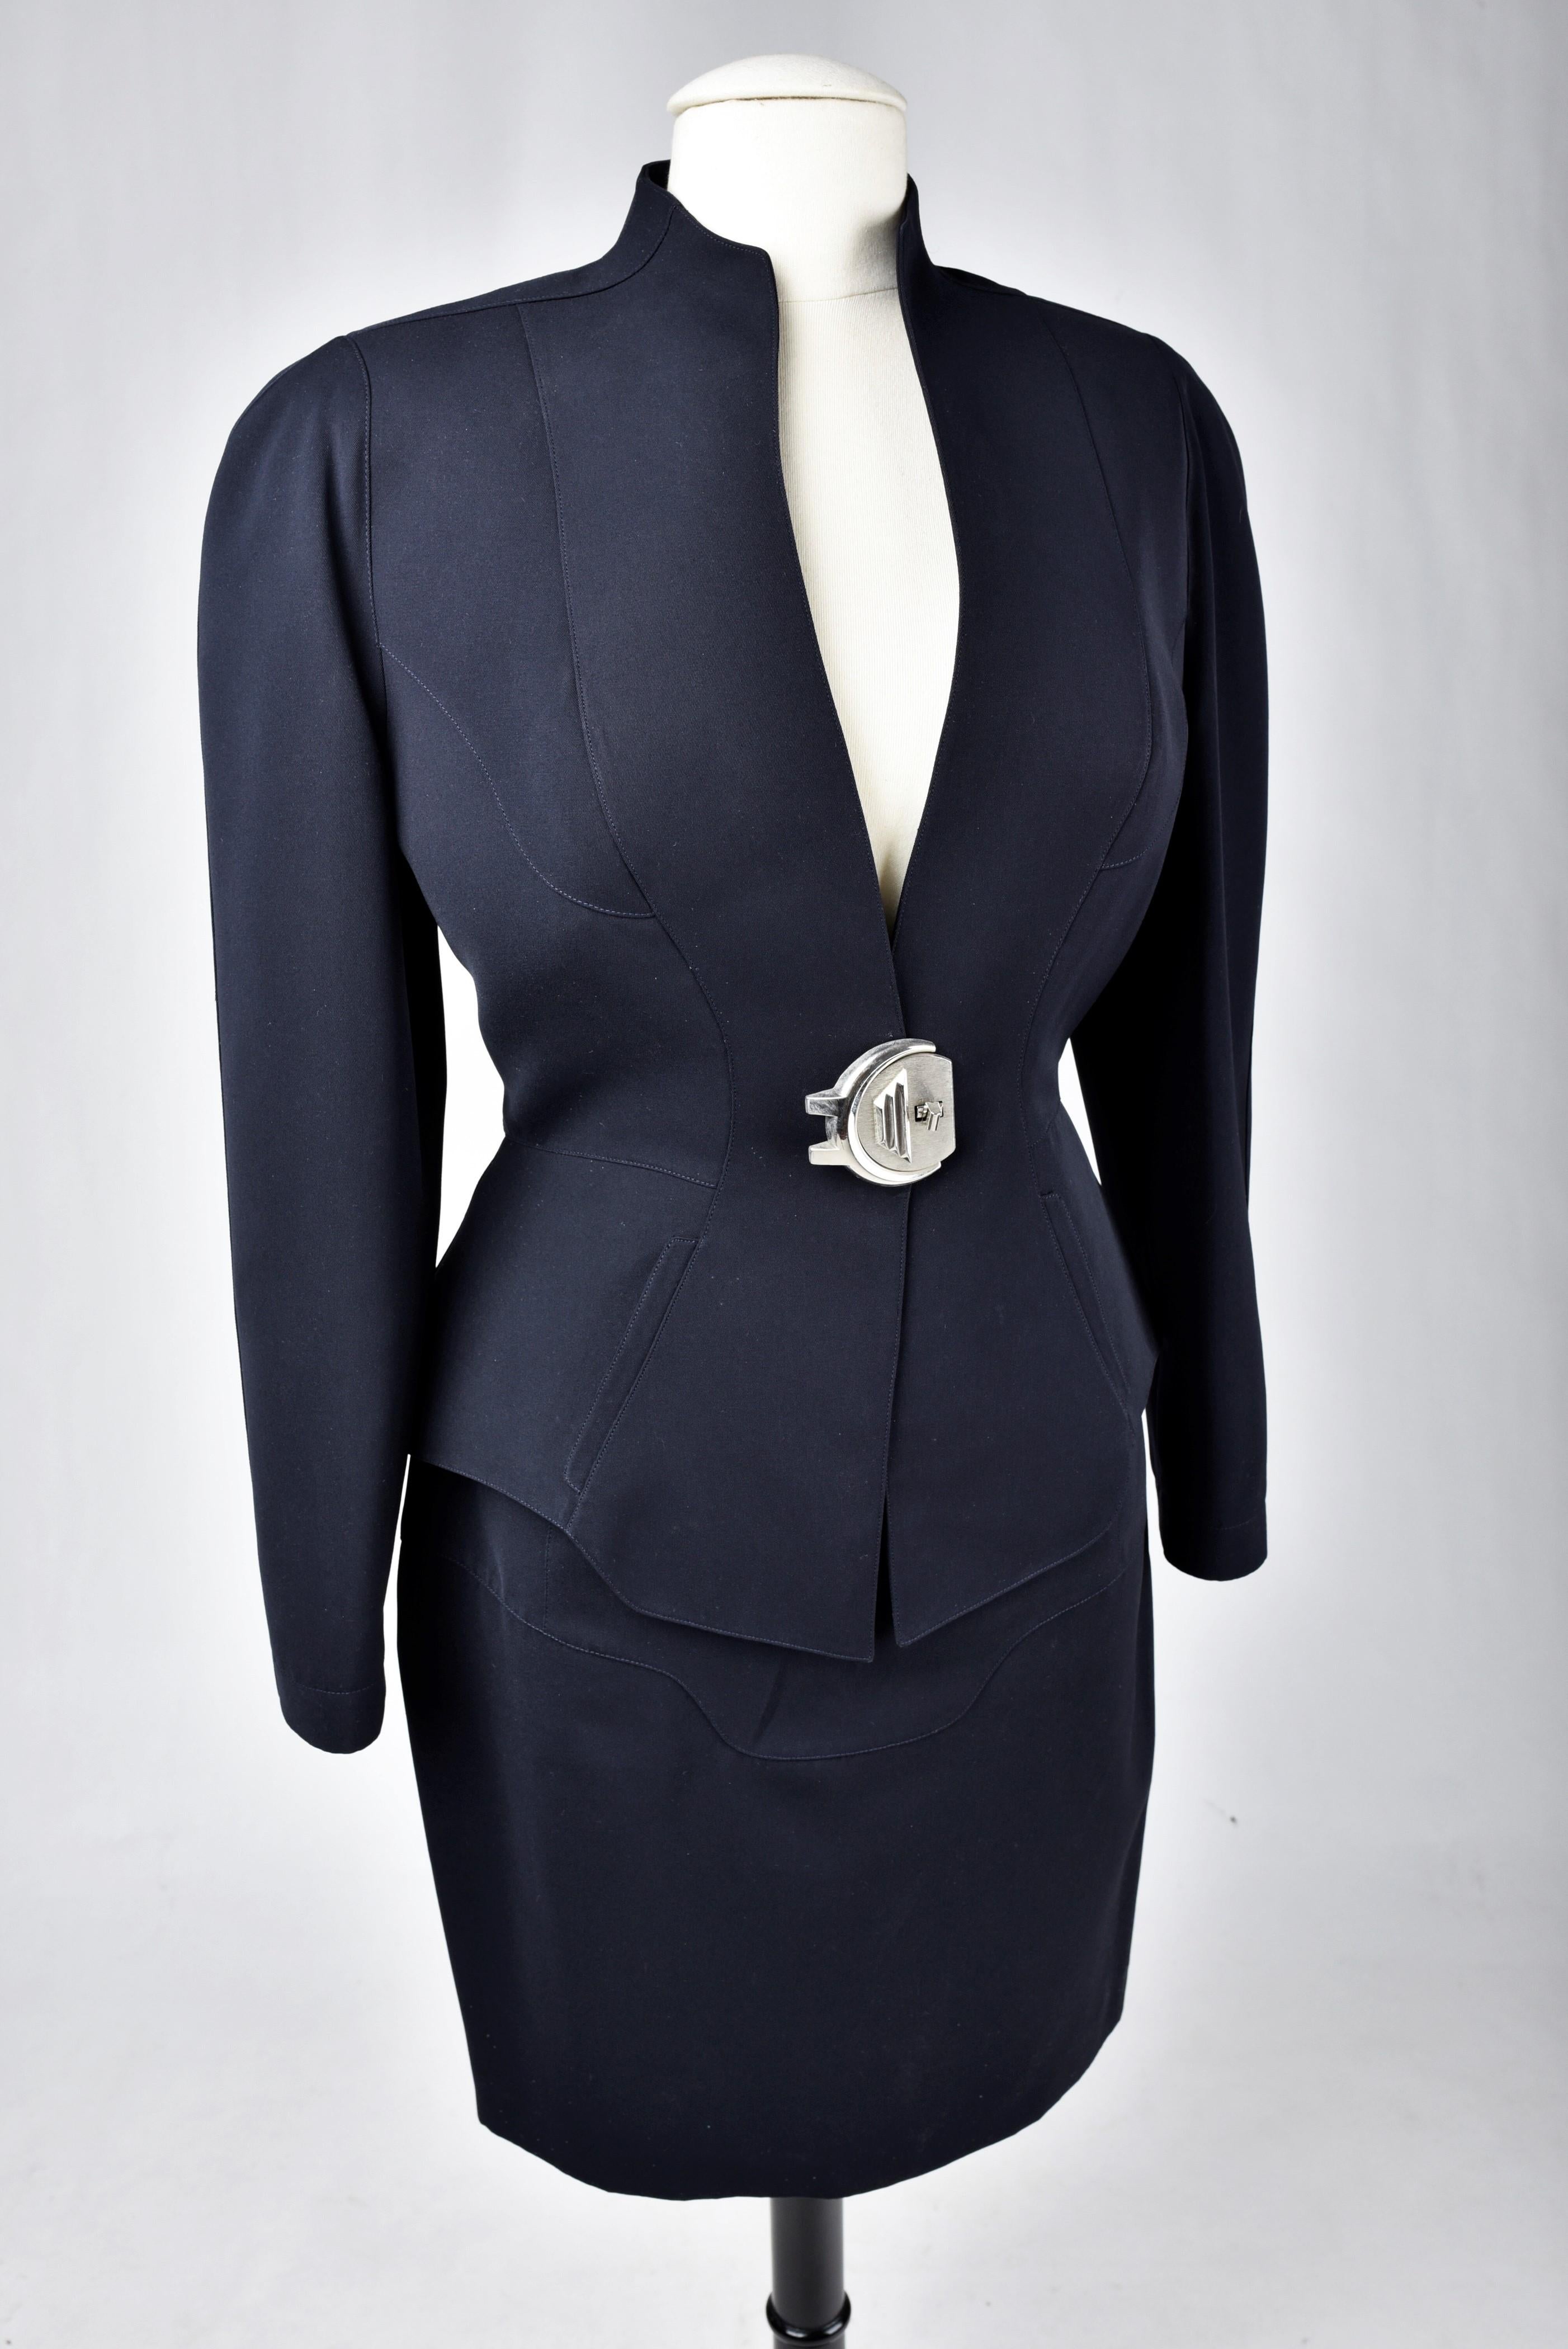 A Thierry Mugler Couture Black Tuxedo Skirt Suit - France Circa 1990/2000 For Sale 10